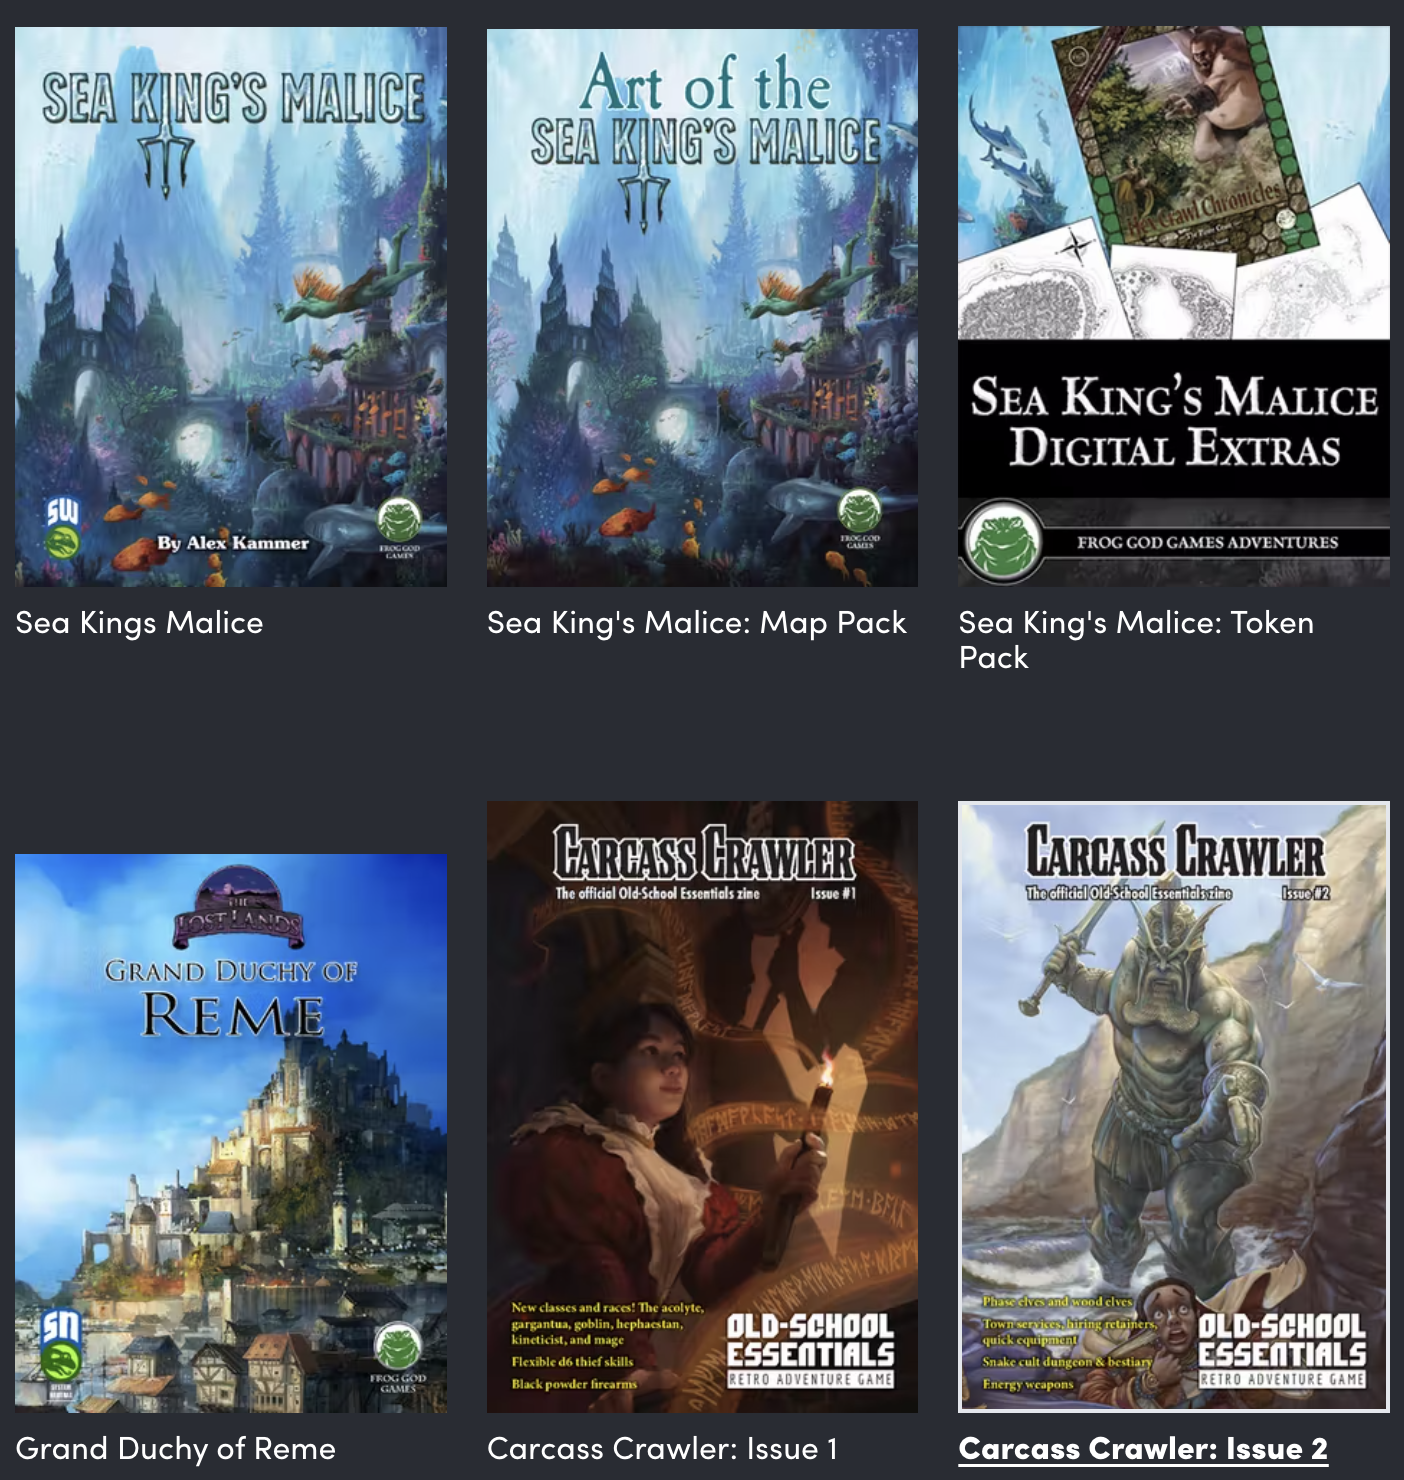 Tenkar's Tavern: 22 Hour Warning - The Frog God Games / Kobold Press 5e  Humble Bundle is Coming to a Close